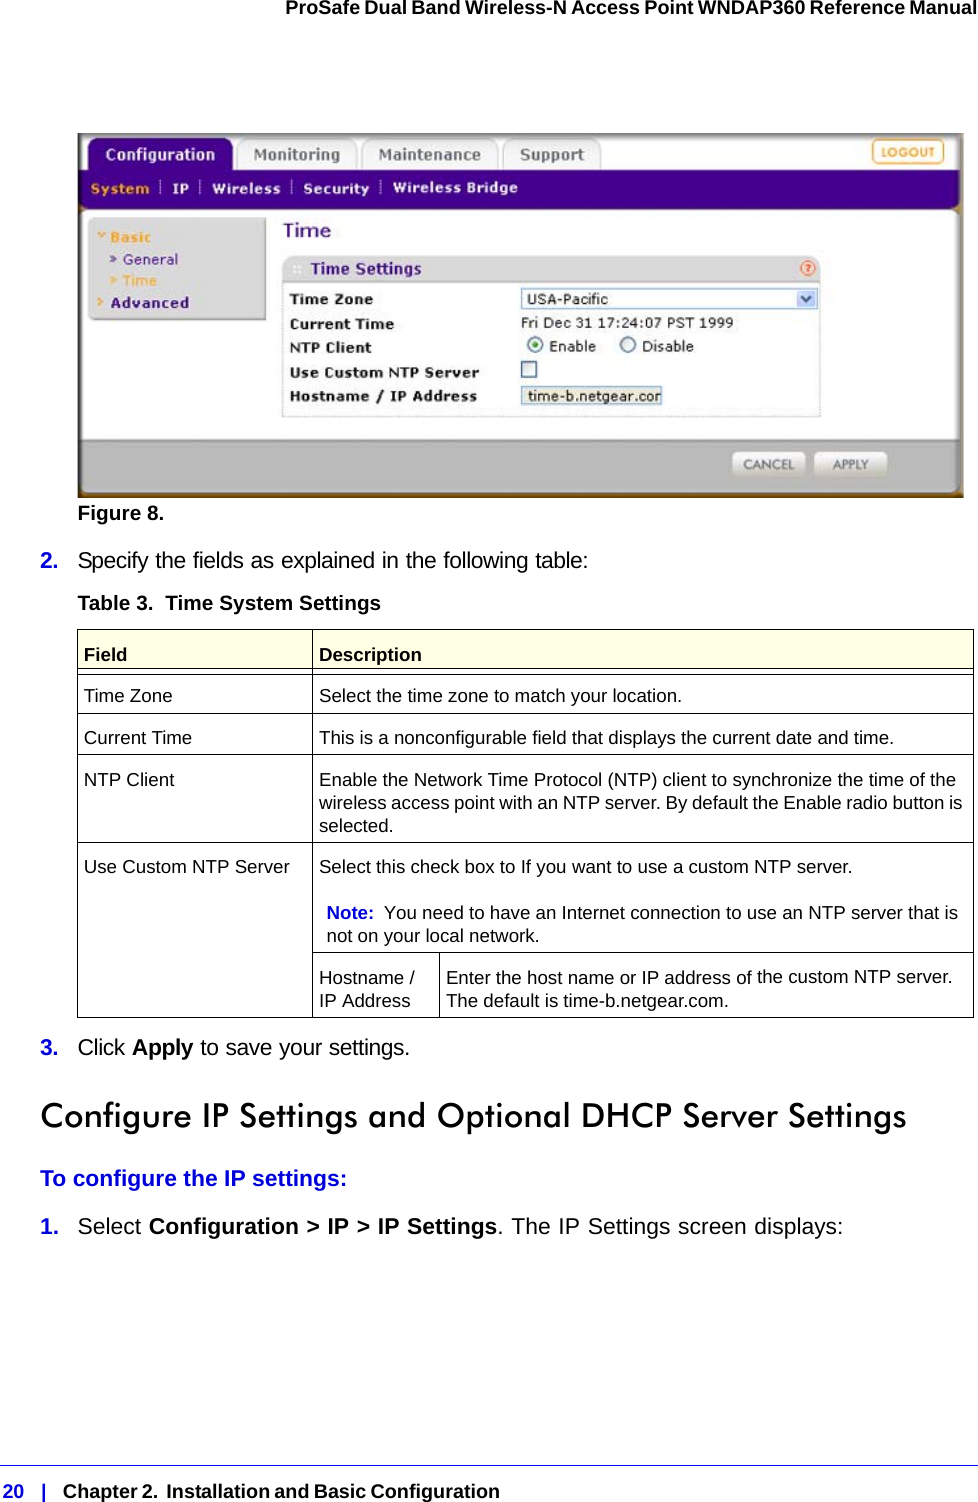 20   |   Chapter 2.  Installation and Basic Configuration  ProSafe Dual Band Wireless-N Access Point WNDAP360 Reference Manual Figure 8.  2.  Specify the fields as explained in the following table:3.  Click Apply to save your settings.Configure IP Settings and Optional DHCP Server SettingsTo configure the IP settings:1.  Select Configuration &gt; IP &gt; IP Settings. The IP Settings screen displays:Table 3.  Time System Settings Field  DescriptionTime Zone Select the time zone to match your location.Current Time This is a nonconfigurable field that displays the current date and time.NTP Client Enable the Network Time Protocol (NTP) client to synchronize the time of the wireless access point with an NTP server. By default the Enable radio button is selected.Use Custom NTP Server Select this check box to If you want to use a custom NTP server.Note: You need to have an Internet connection to use an NTP server that is not on your local network.Hostname / IP Address Enter the host name or IP address of the custom NTP server. The default is time-b.netgear.com.